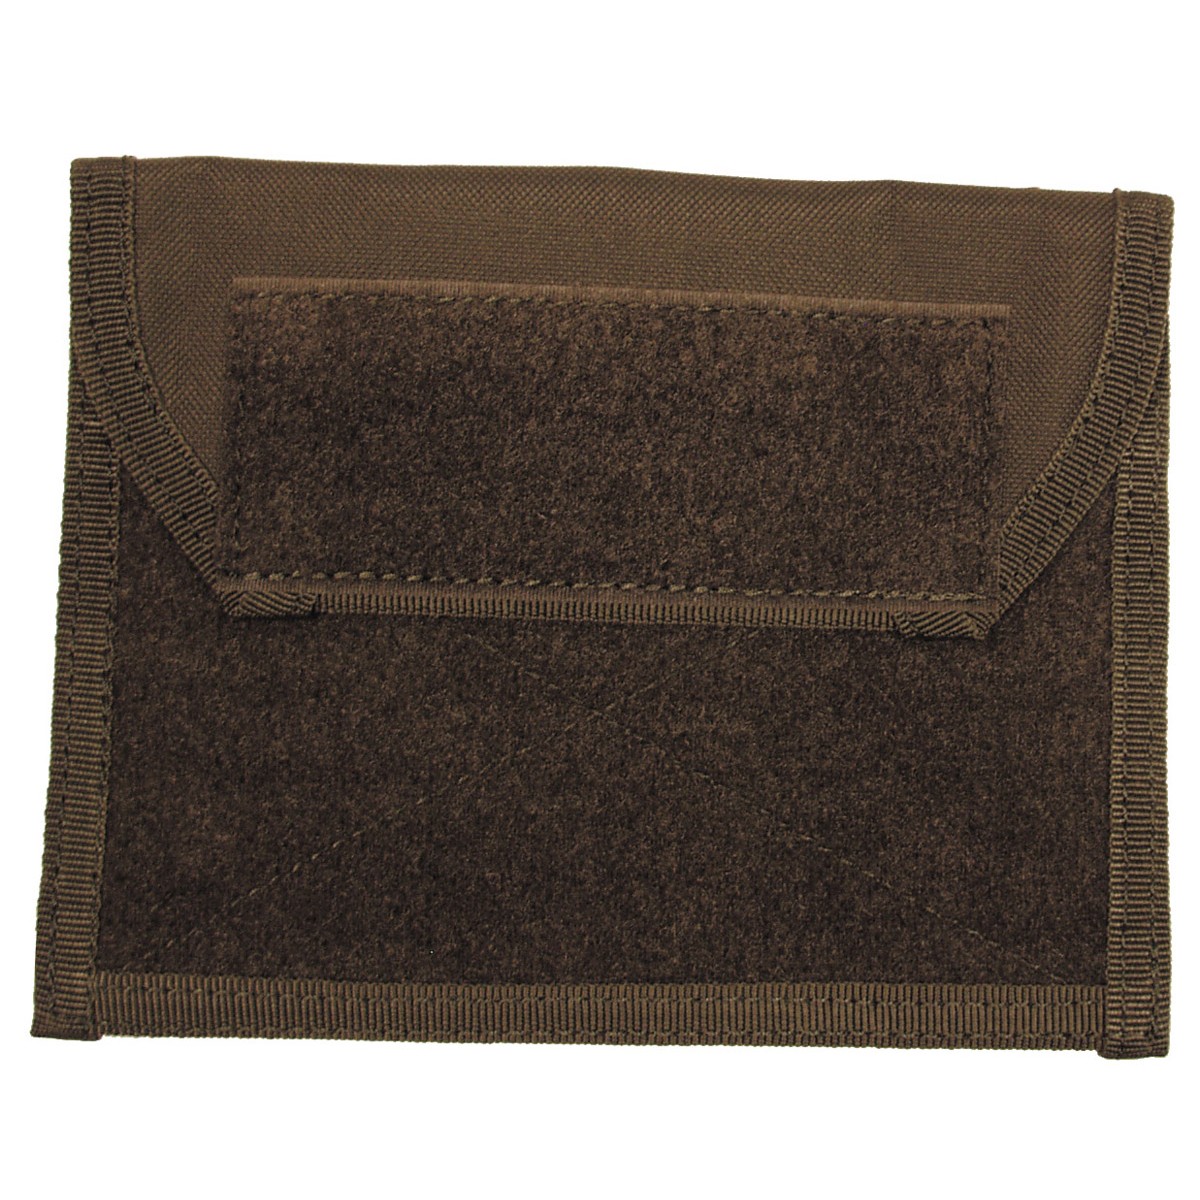 Tactical Admin Chest Molle Pouch w/ Velcro - OD Green